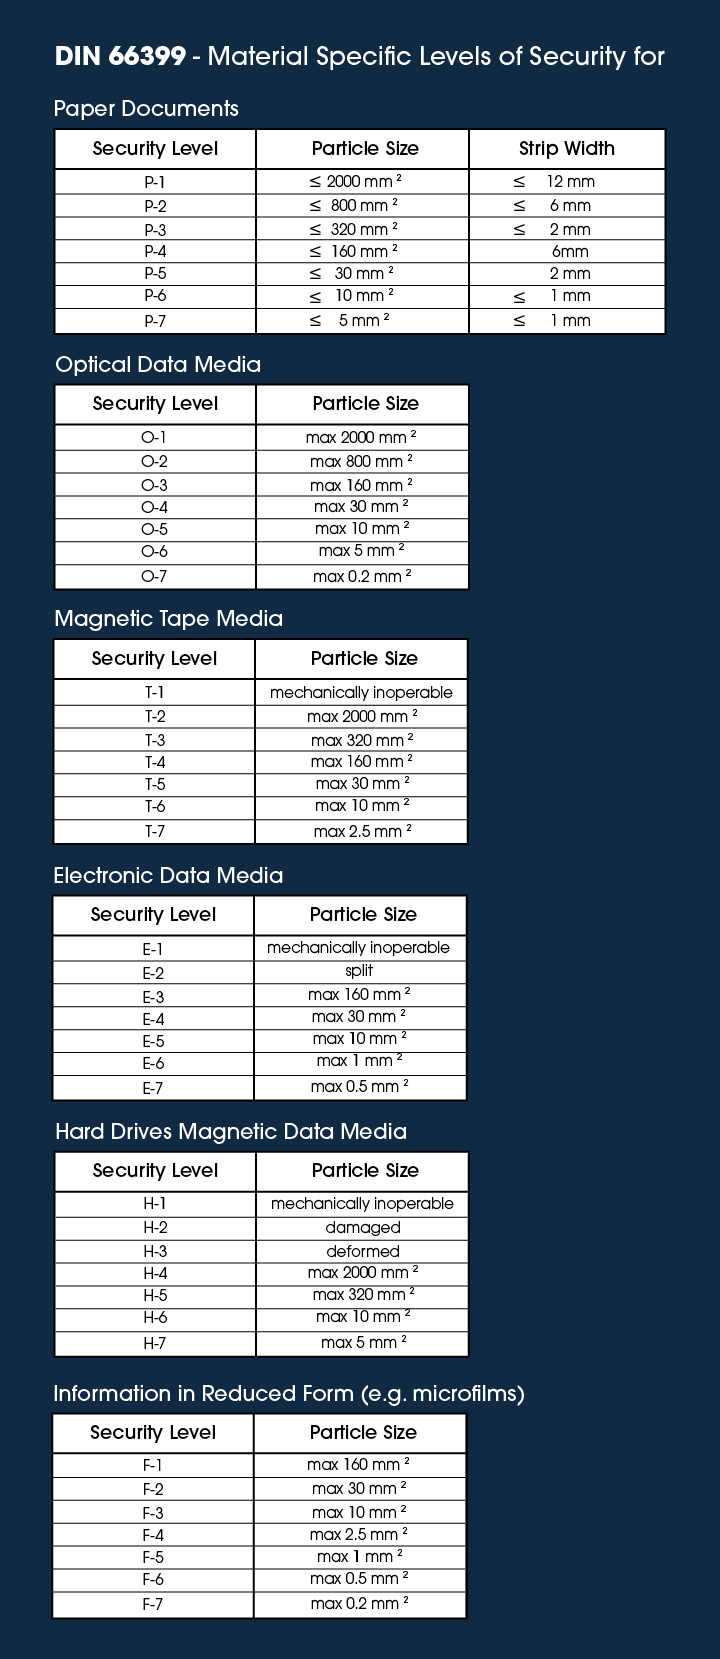 A table showing DIN 66399 material specific levels of security for shredding